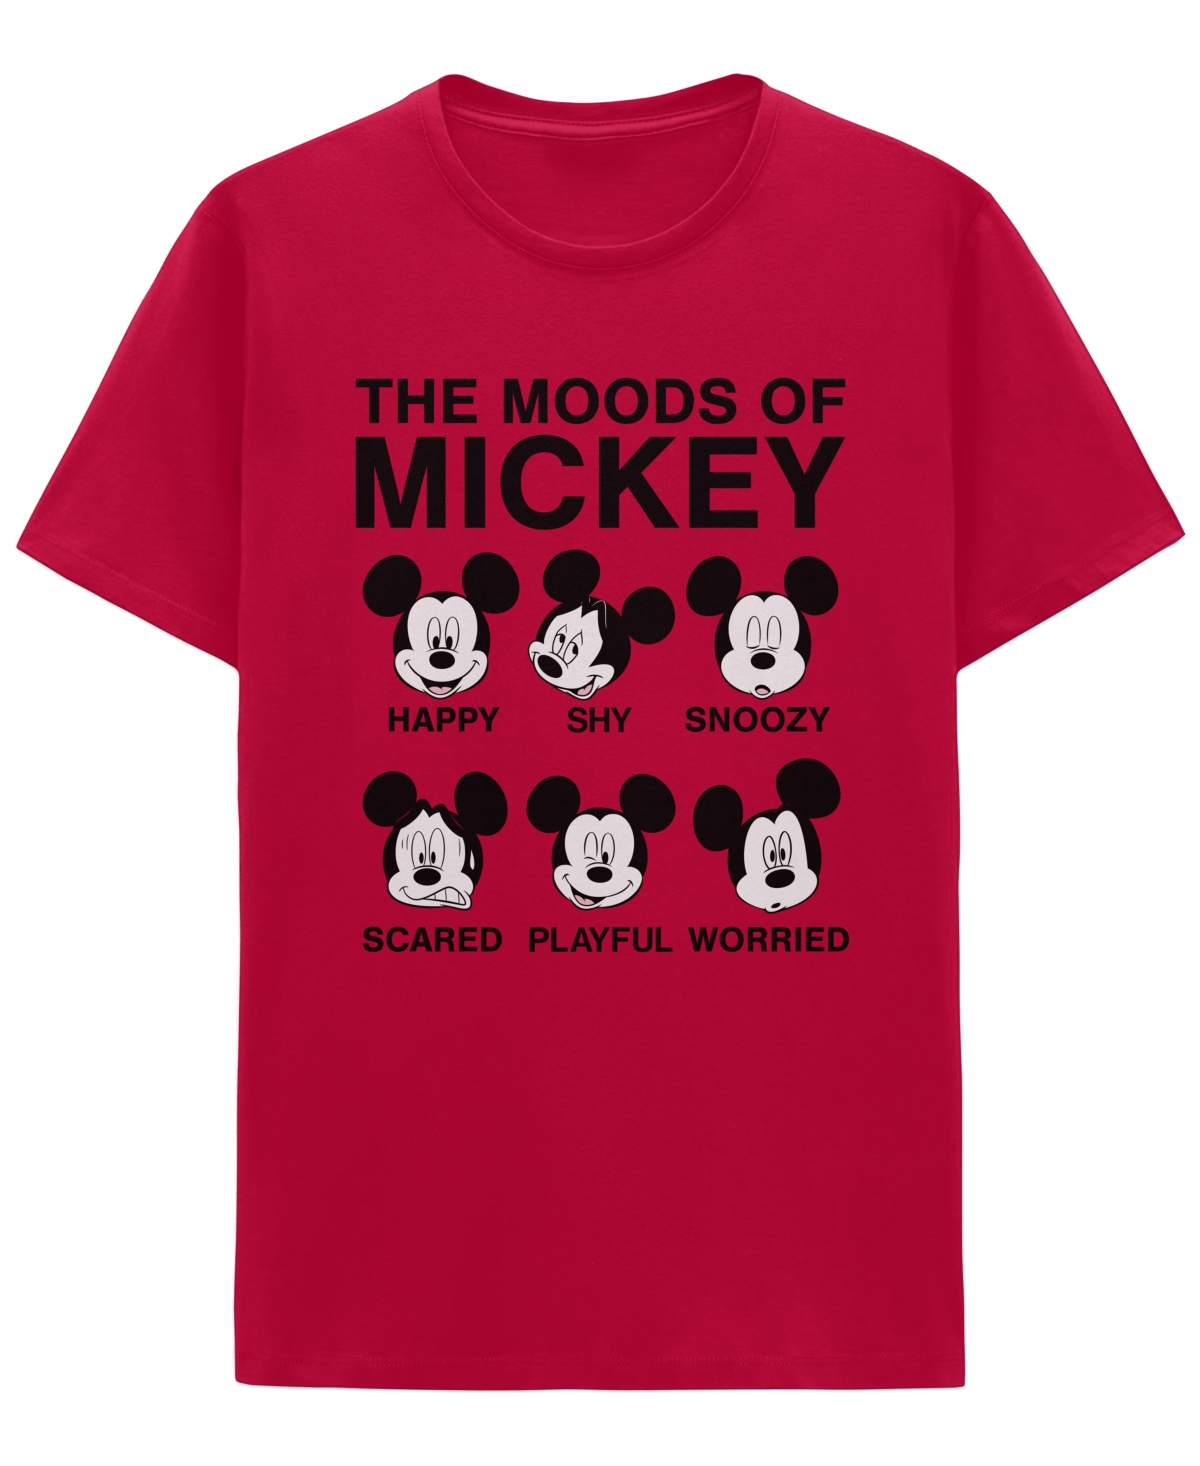 Men's Mickey Mouse Short Sleeve T-shirt - Red